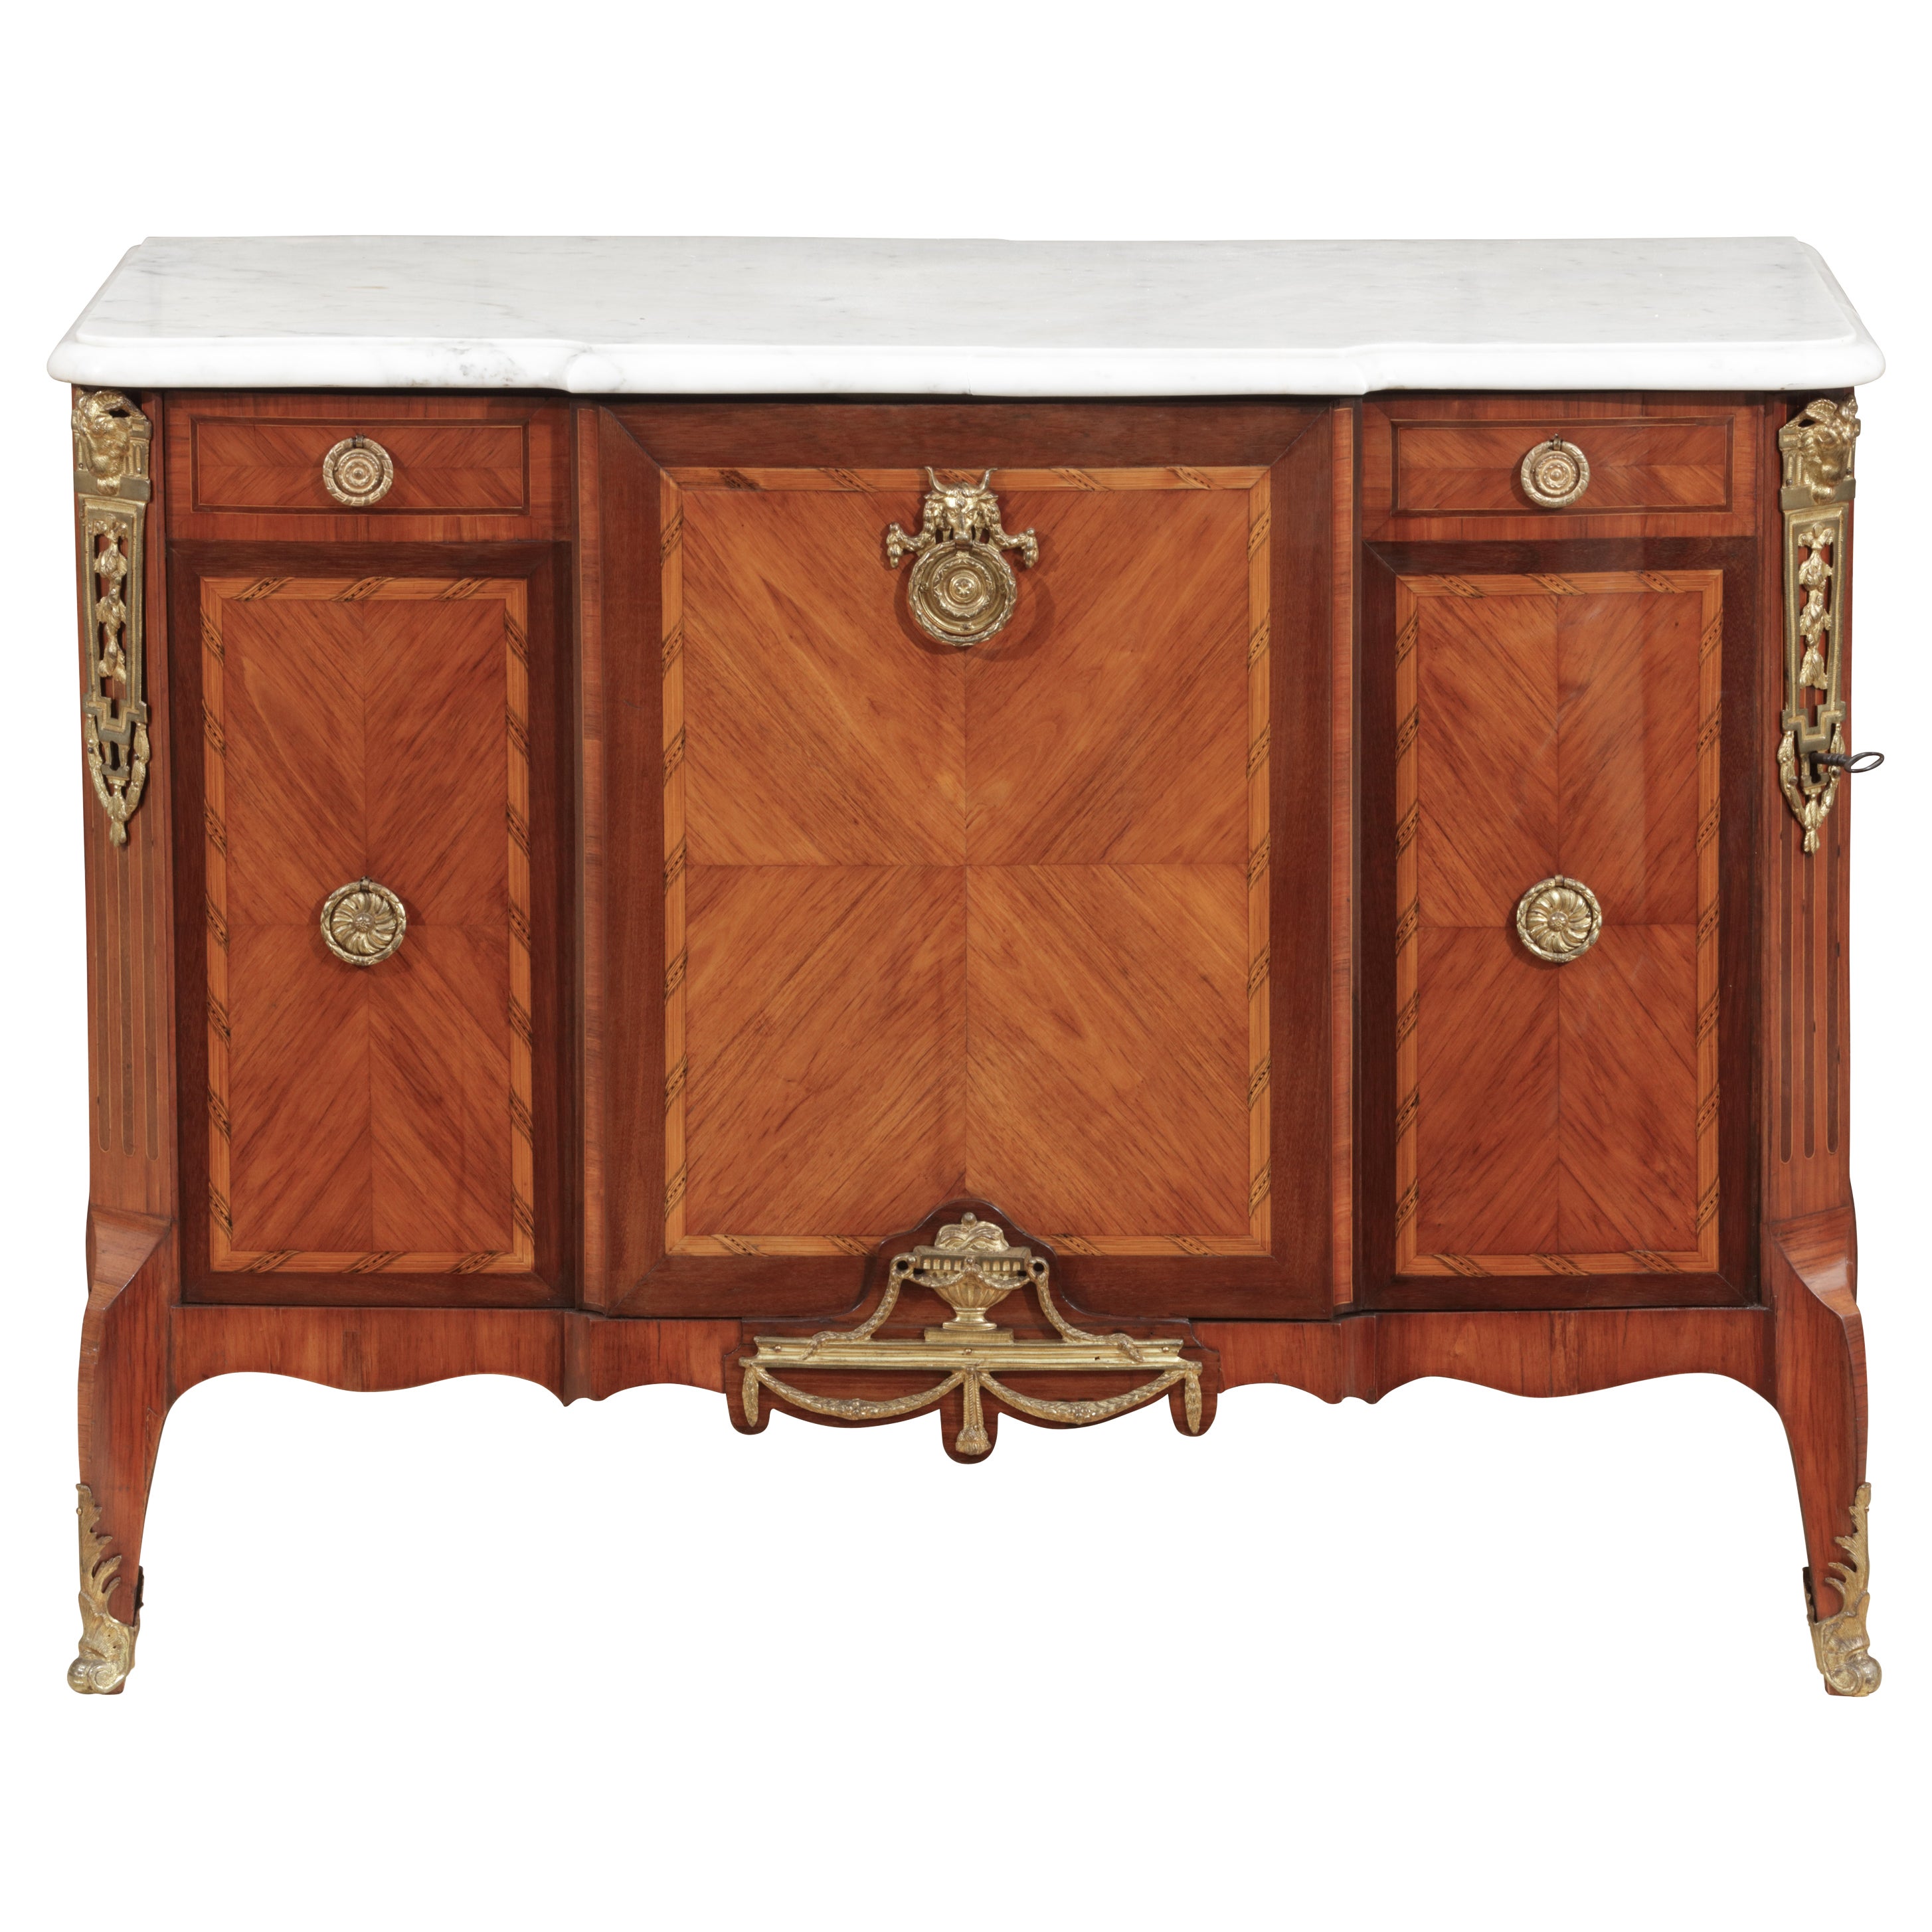 A fine Dutch Commode attr. to the workshop of Matthijs Horrix, circa 1770-1780 For Sale